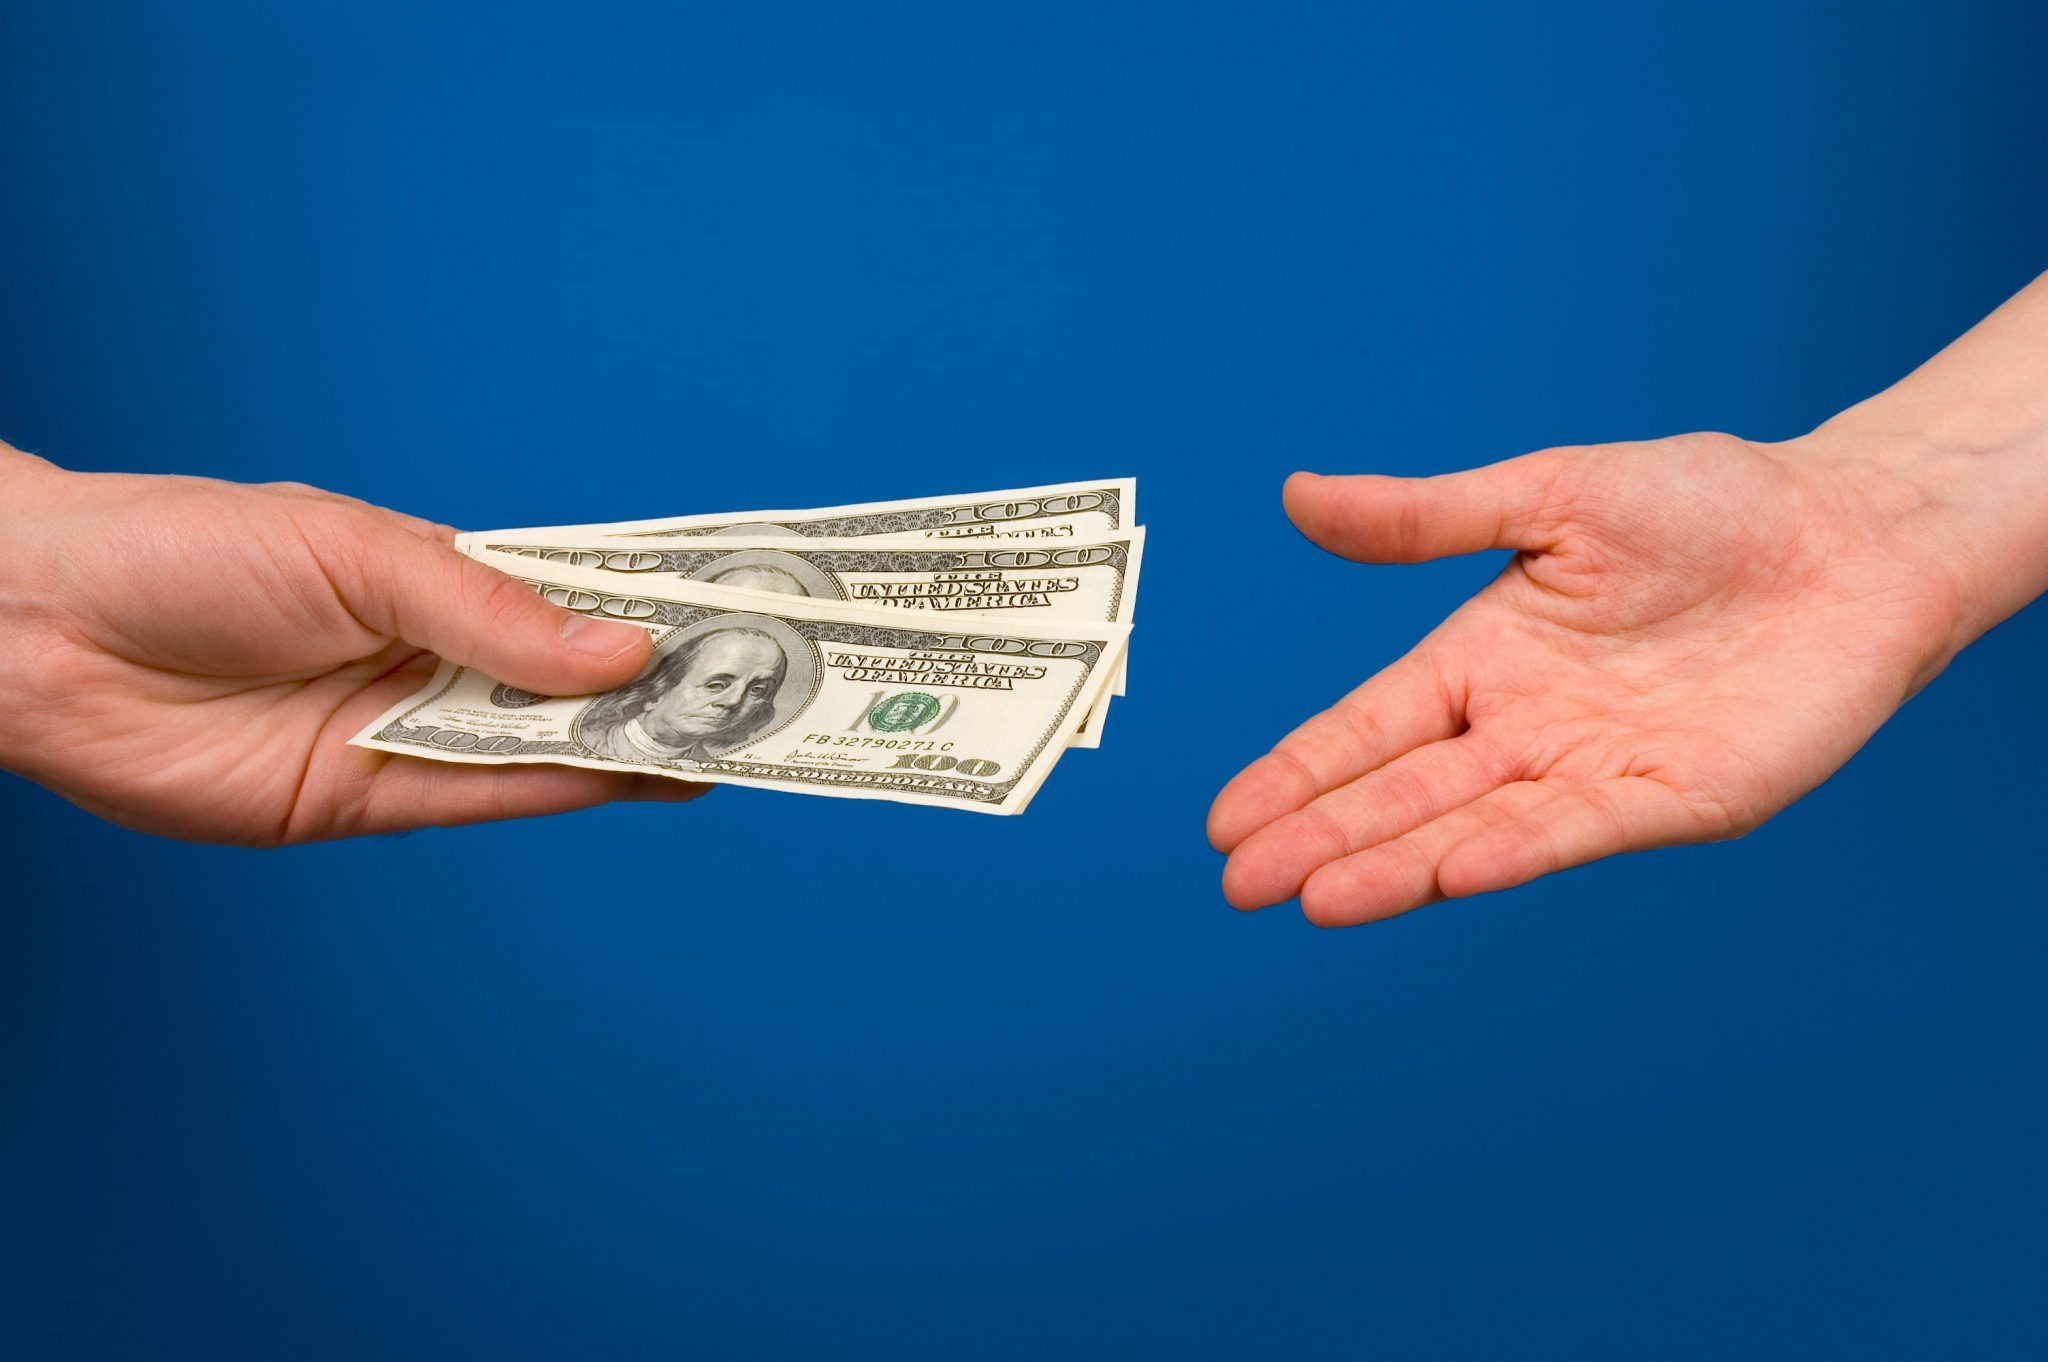 One hand gives money in other hand over blue background